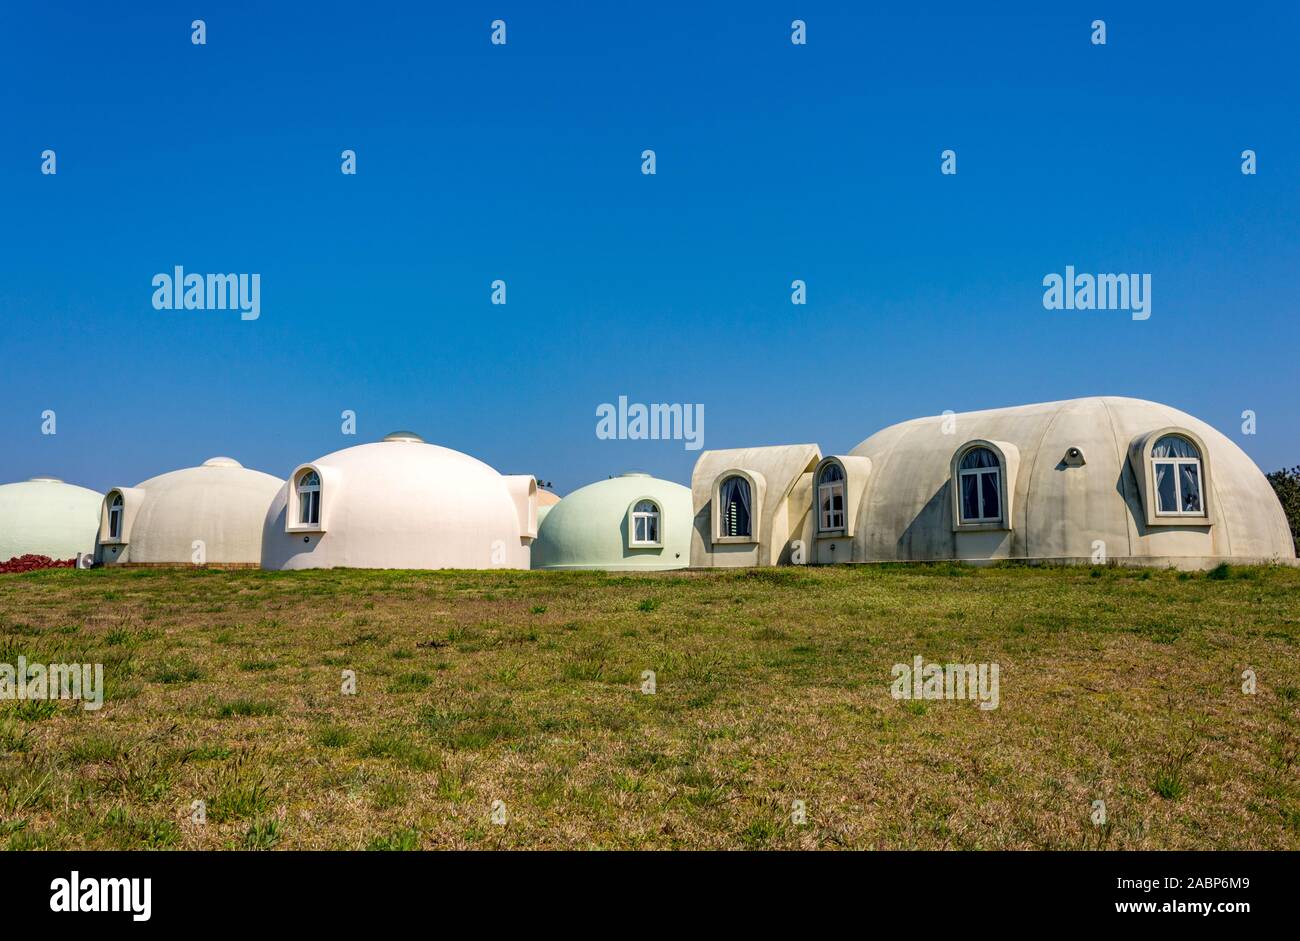 Dome houses, Kaga, Ishikawa Prefecture, Japan, assembled from prefabricated components. Stock Photo